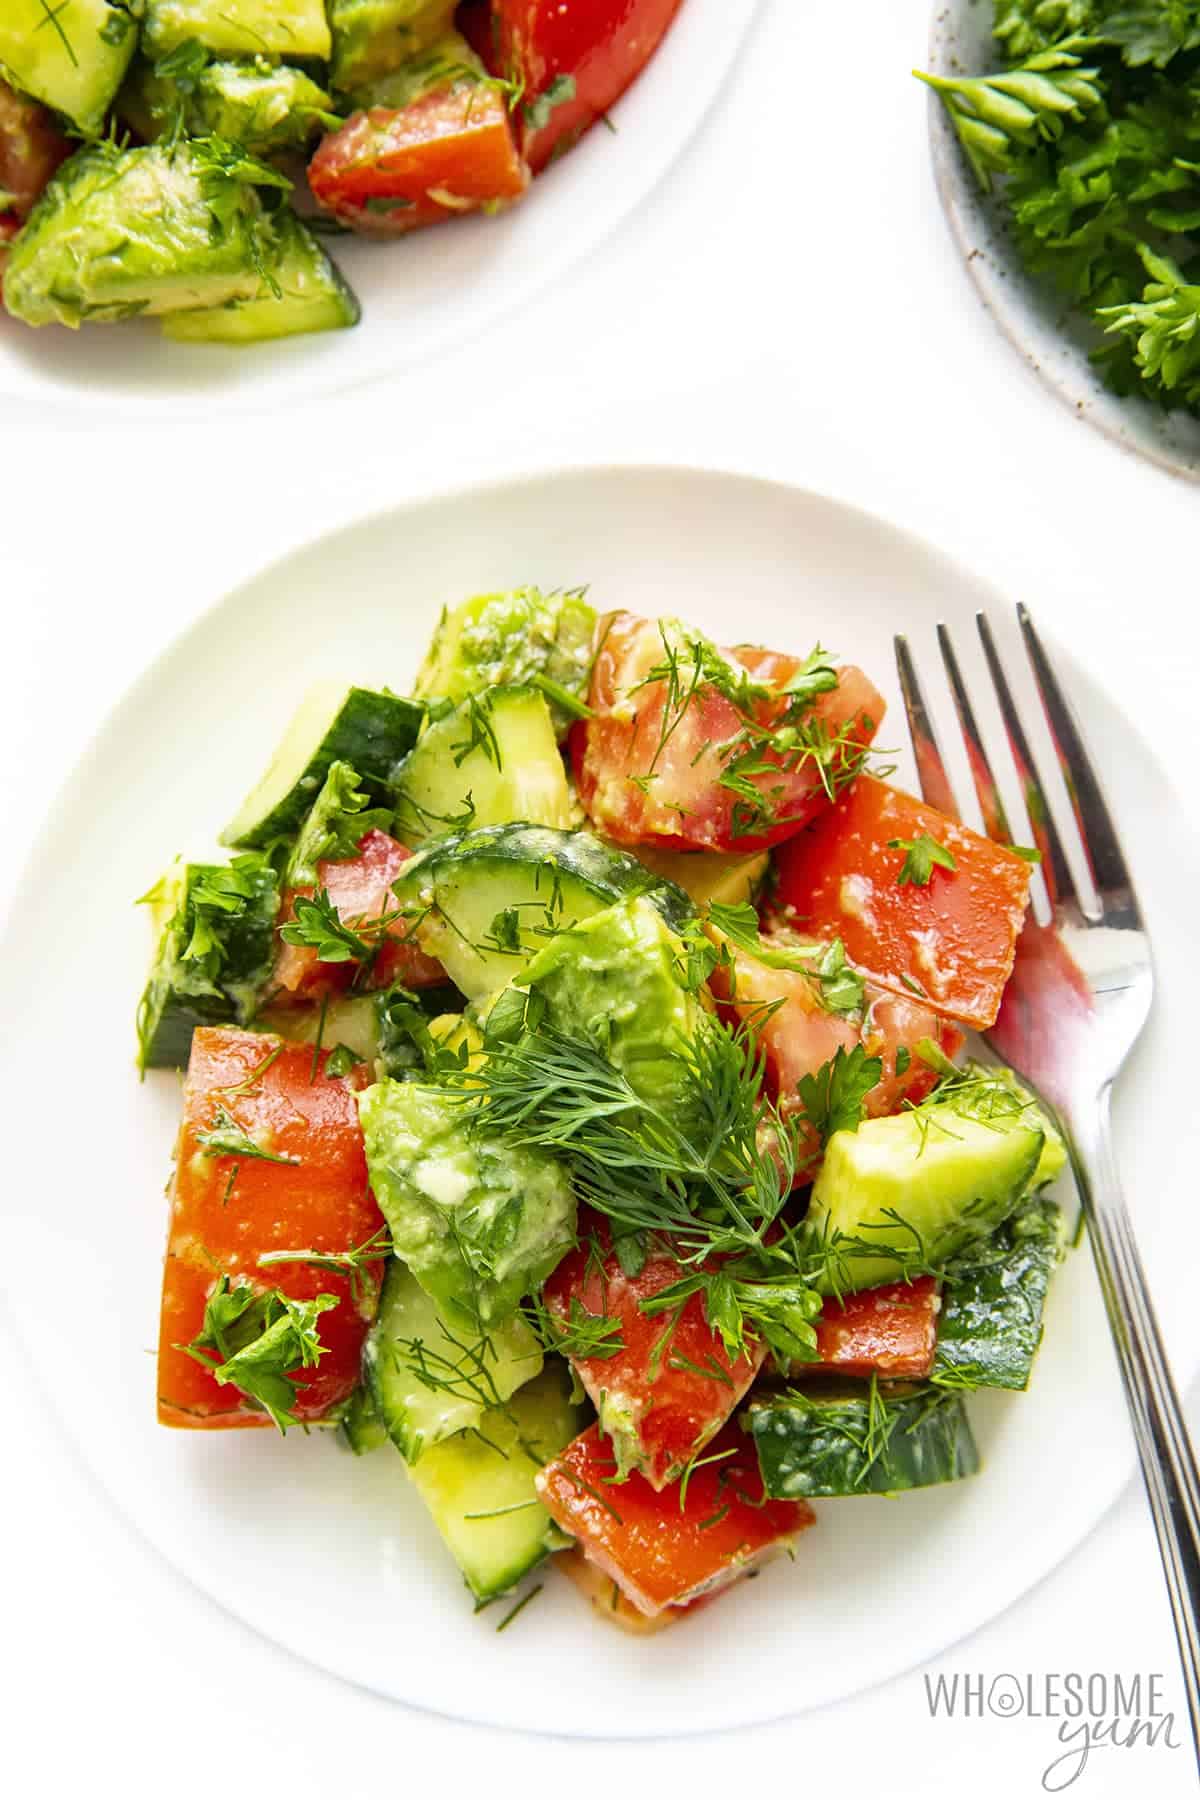 Salad with tomato, cucumber, and avocado on a plate with fork